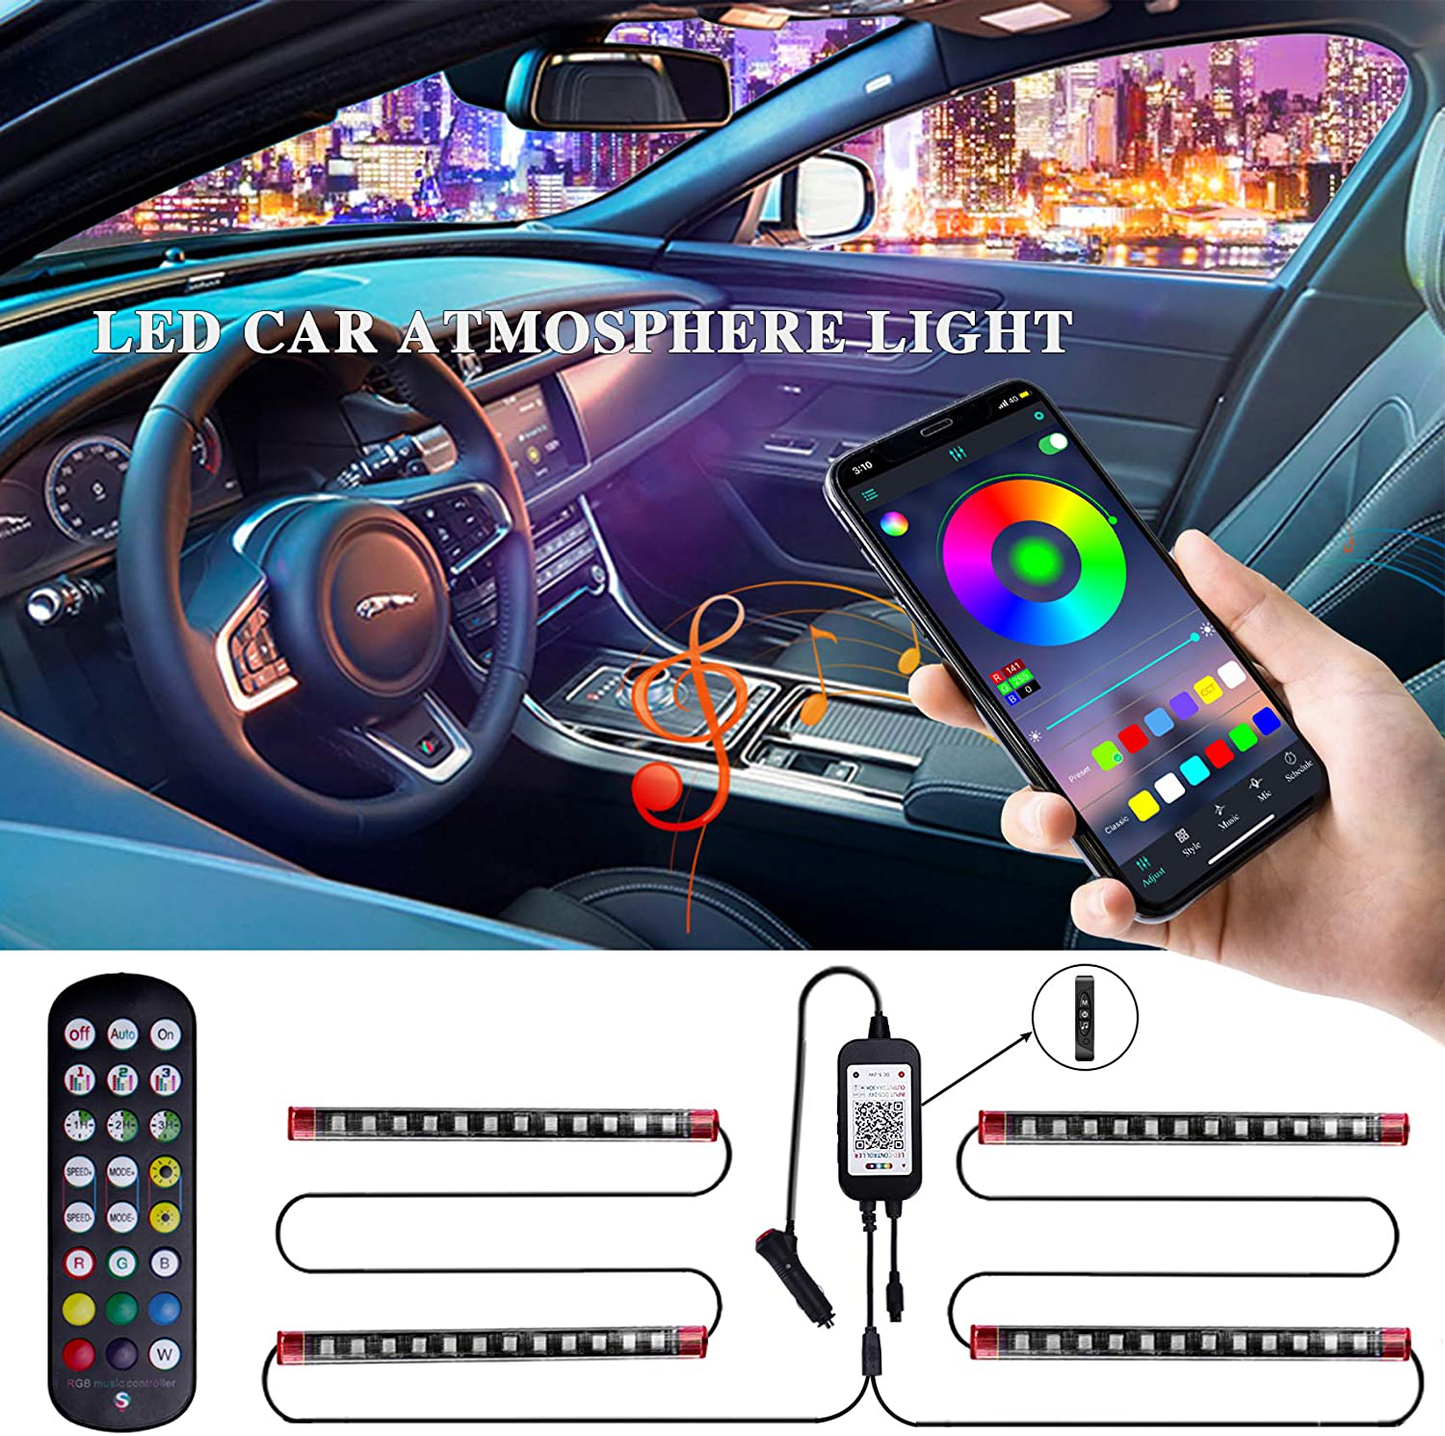 LivTee 12V Interior Car Lights, Newest Two-Line Design 4pcs 48 LED Multi DIY Color Music Under Dash Car Lighting Waterproof Kits with Wireless Remote & APP Control, Car Charger Included